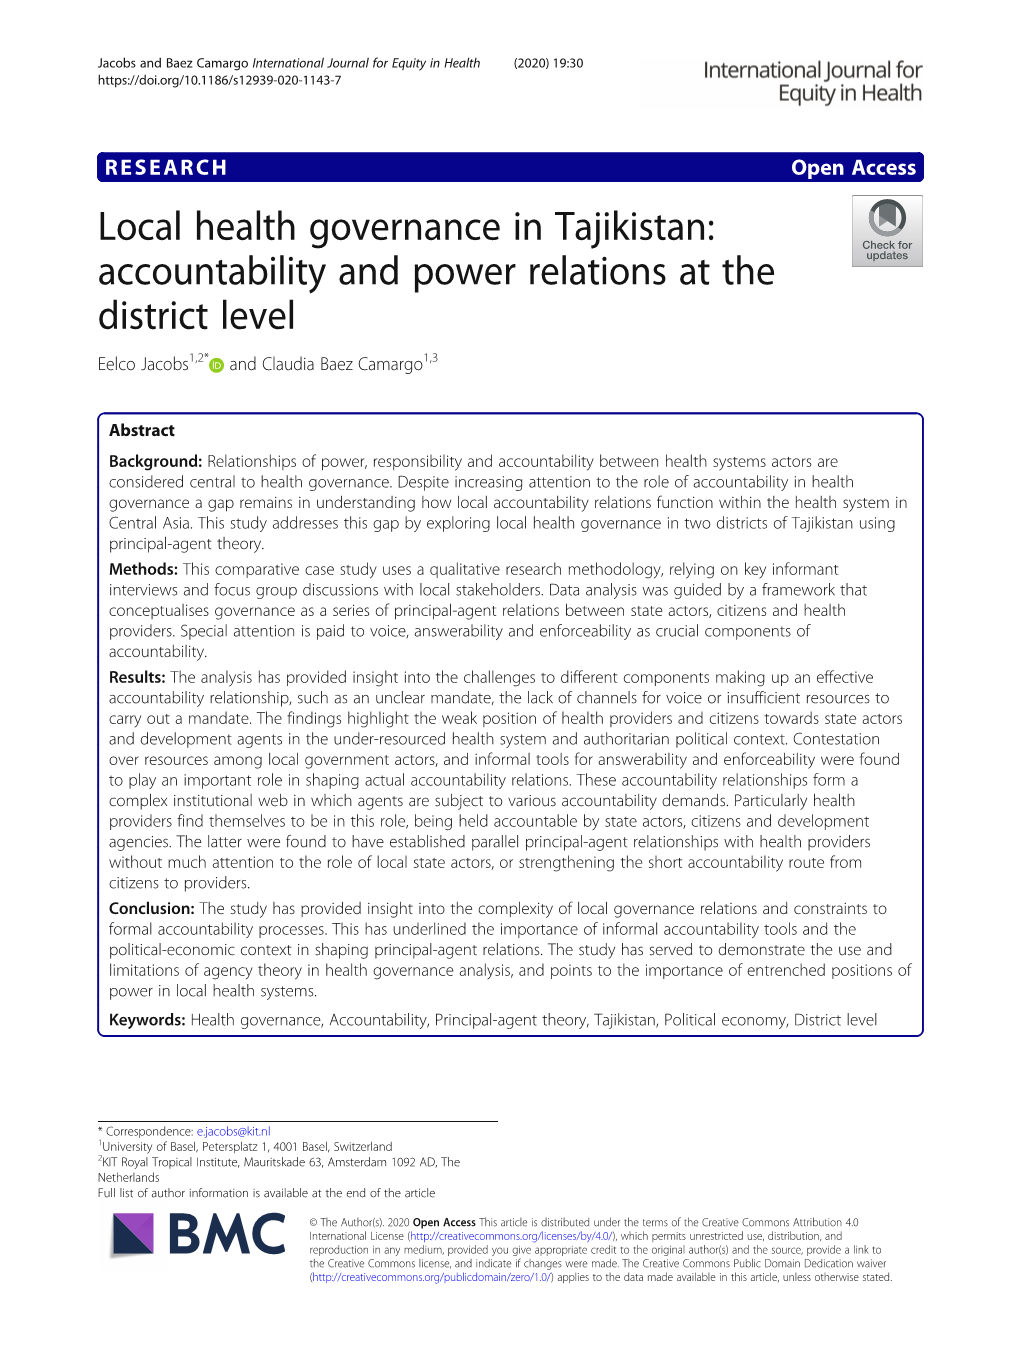 Local Health Governance in Tajikistan: Accountability and Power Relations at the District Level Eelco Jacobs1,2* and Claudia Baez Camargo1,3